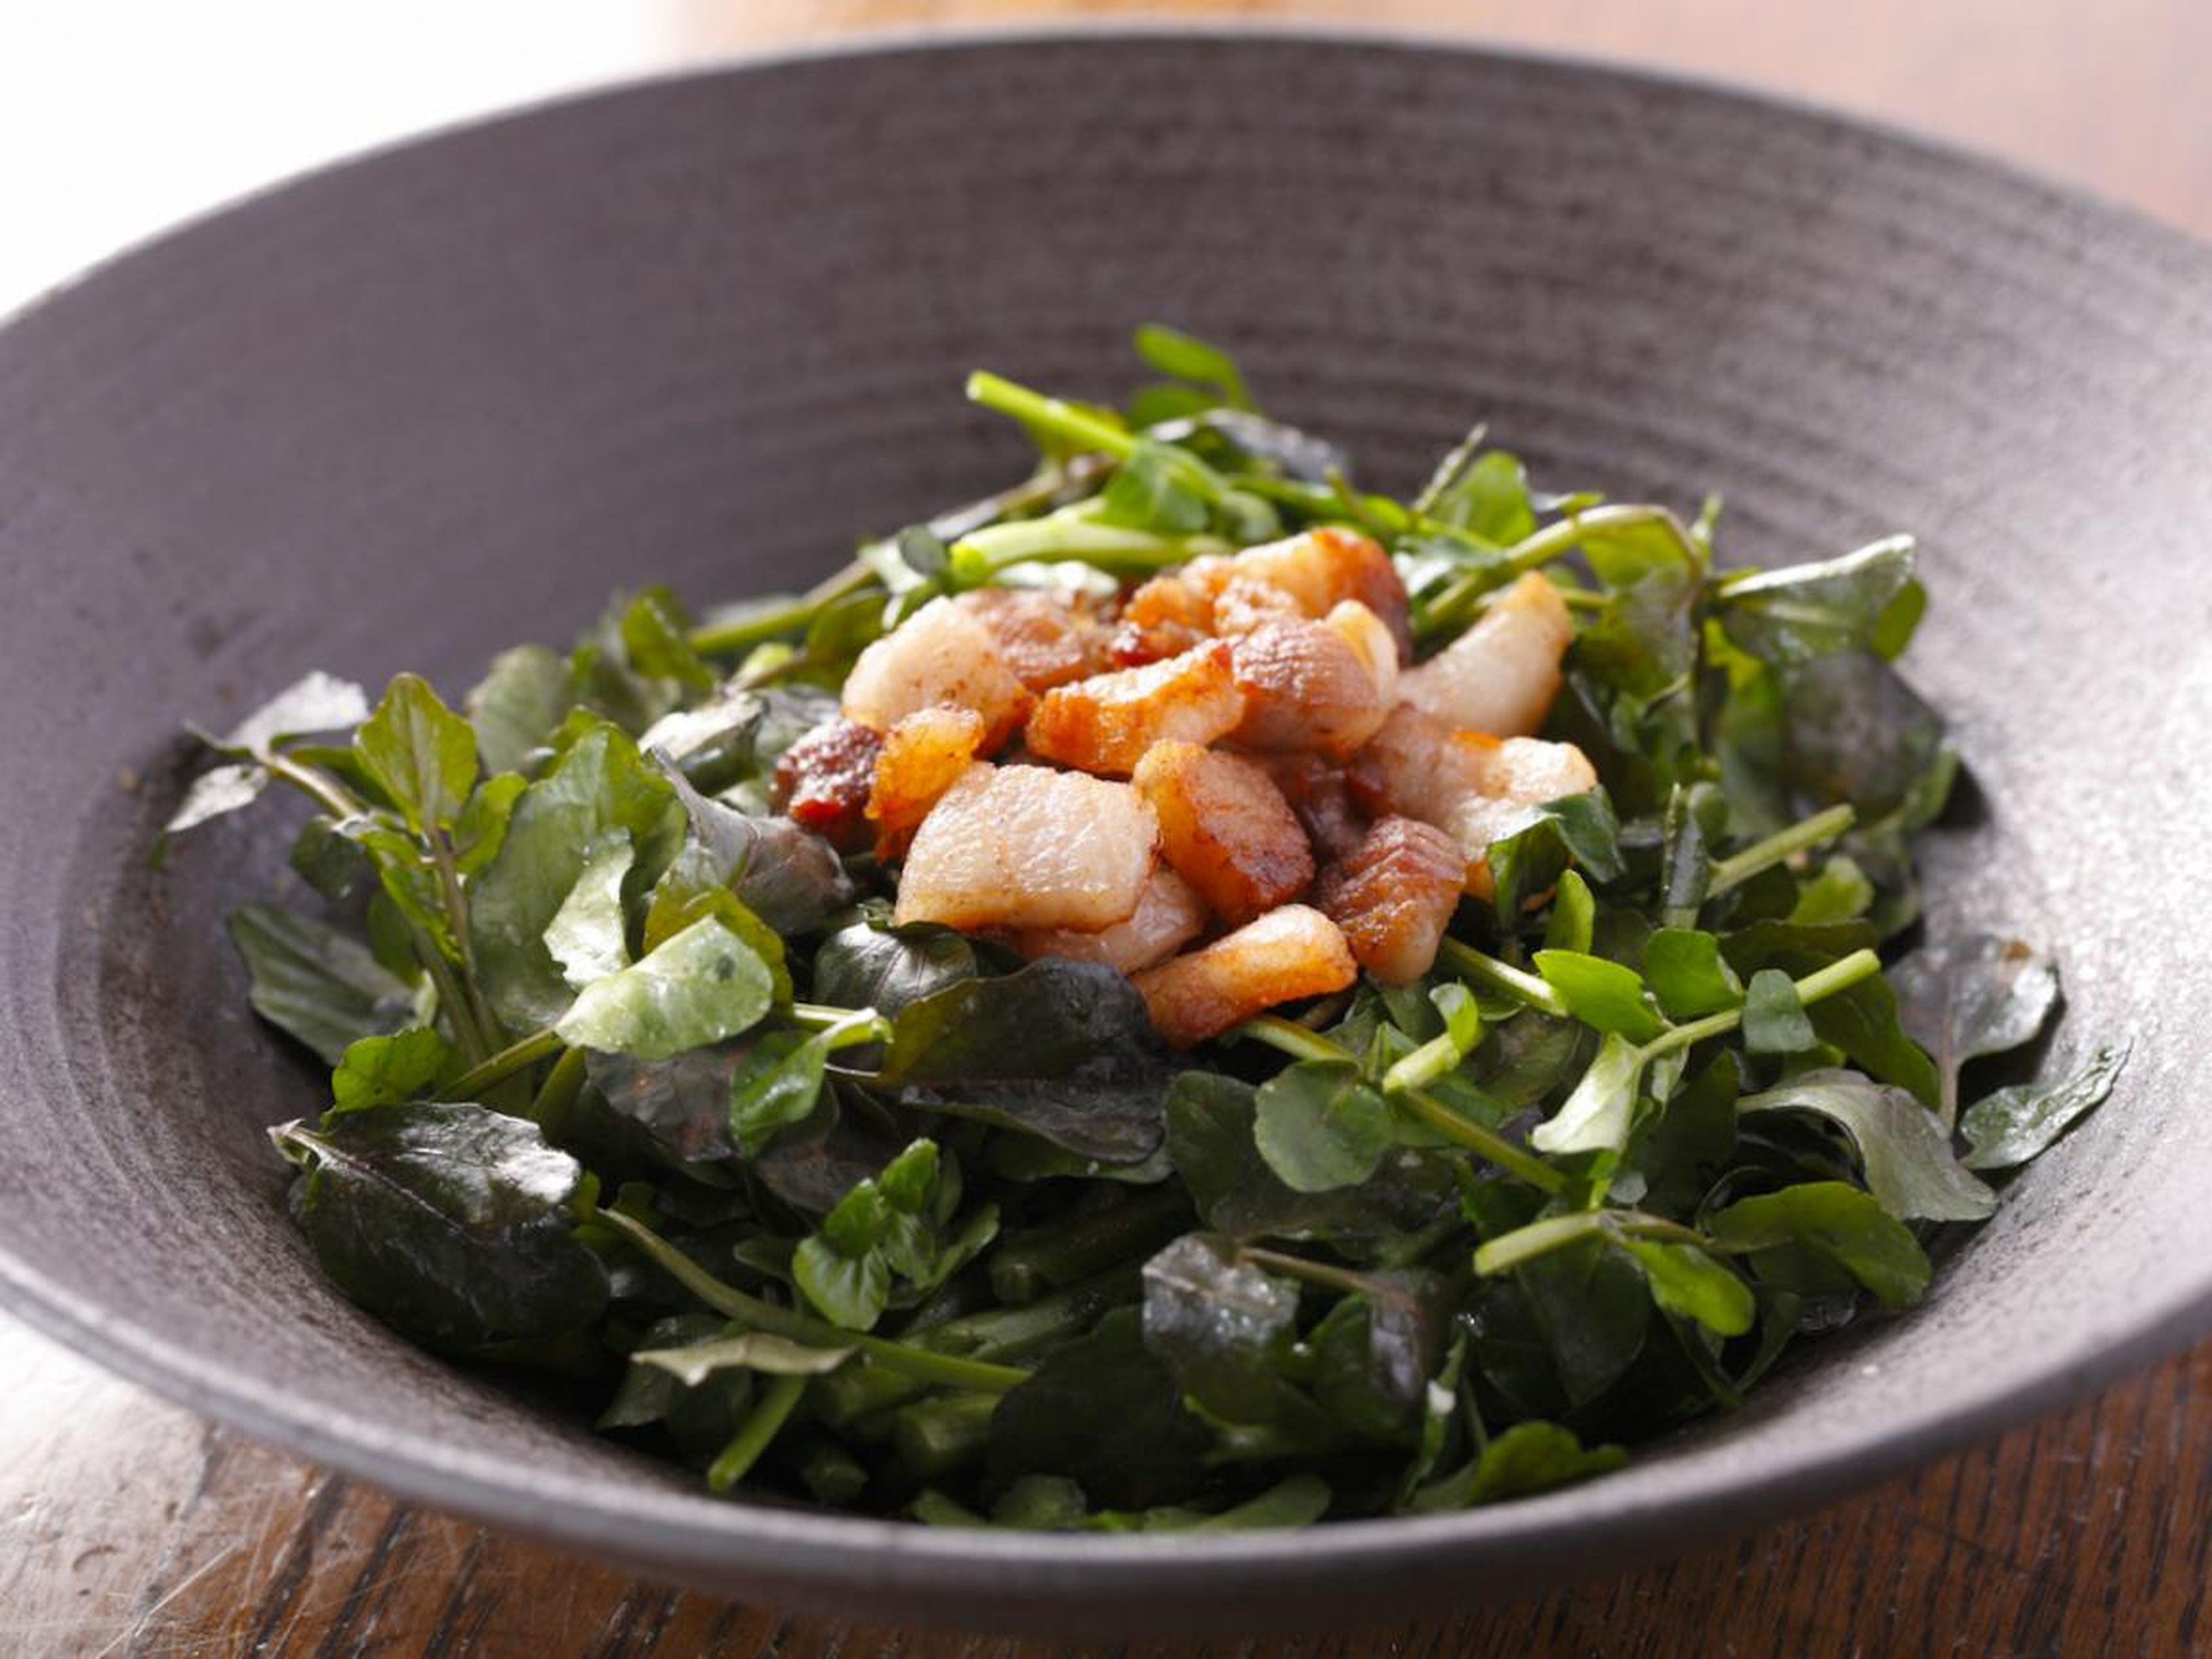 Watercress could help reduce your risk of diseases like diabetes.